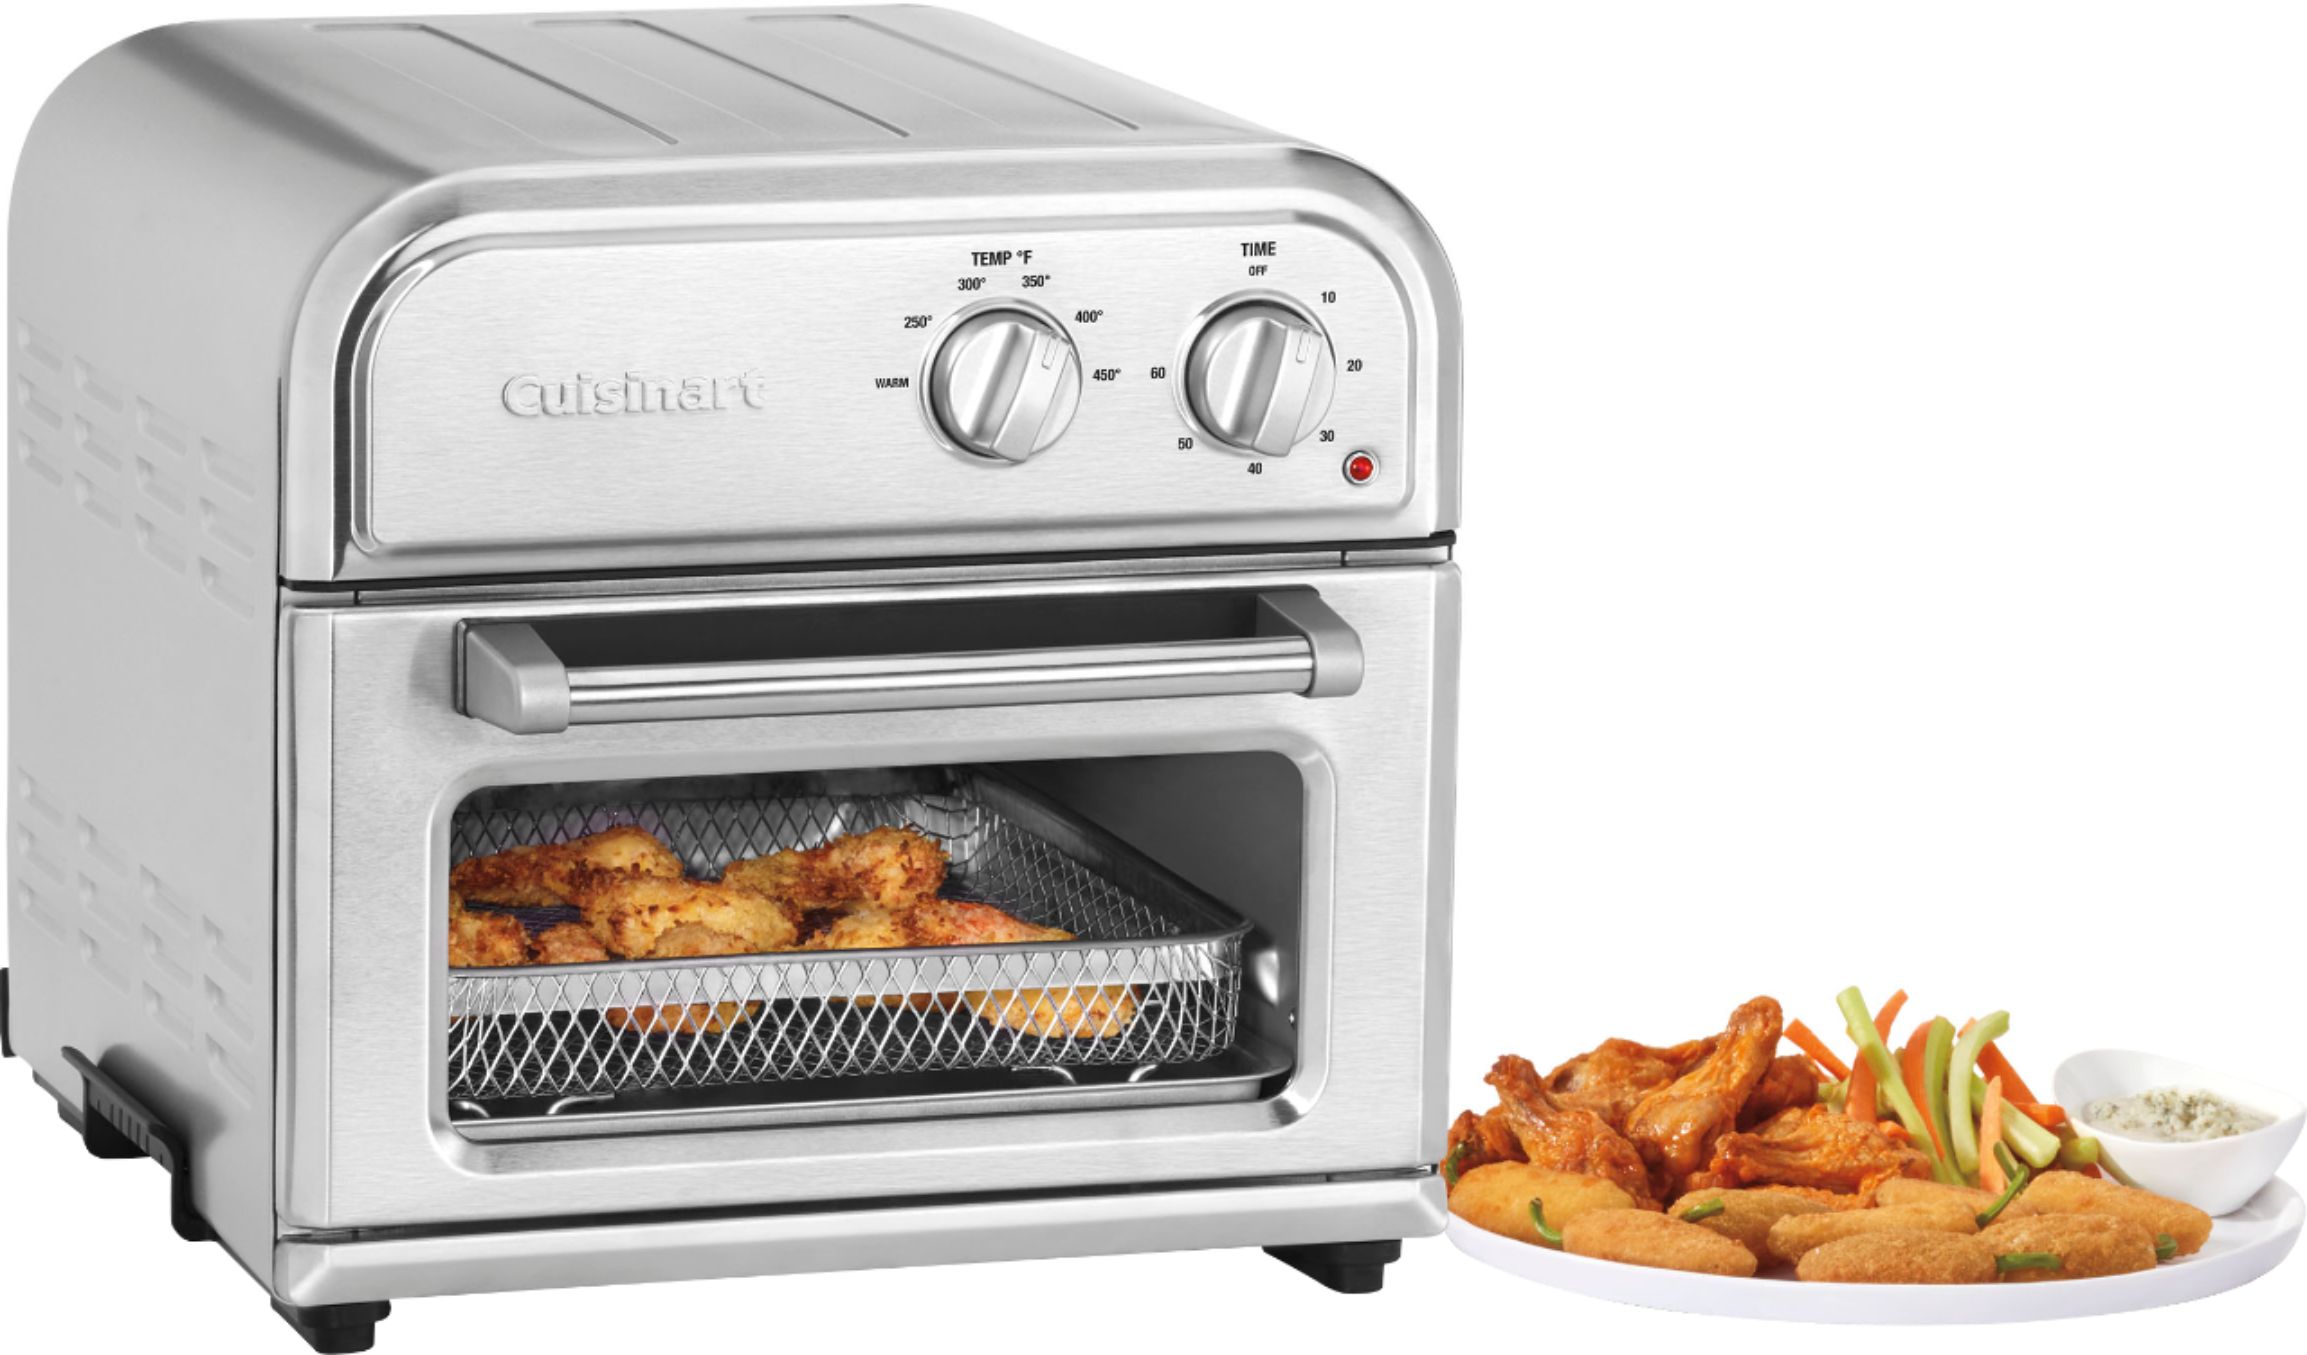 Questions and Answers: Cuisinart Air Fryer Stainless Steel AFR-25 Cuisinart Air Fryer Stainless Steel